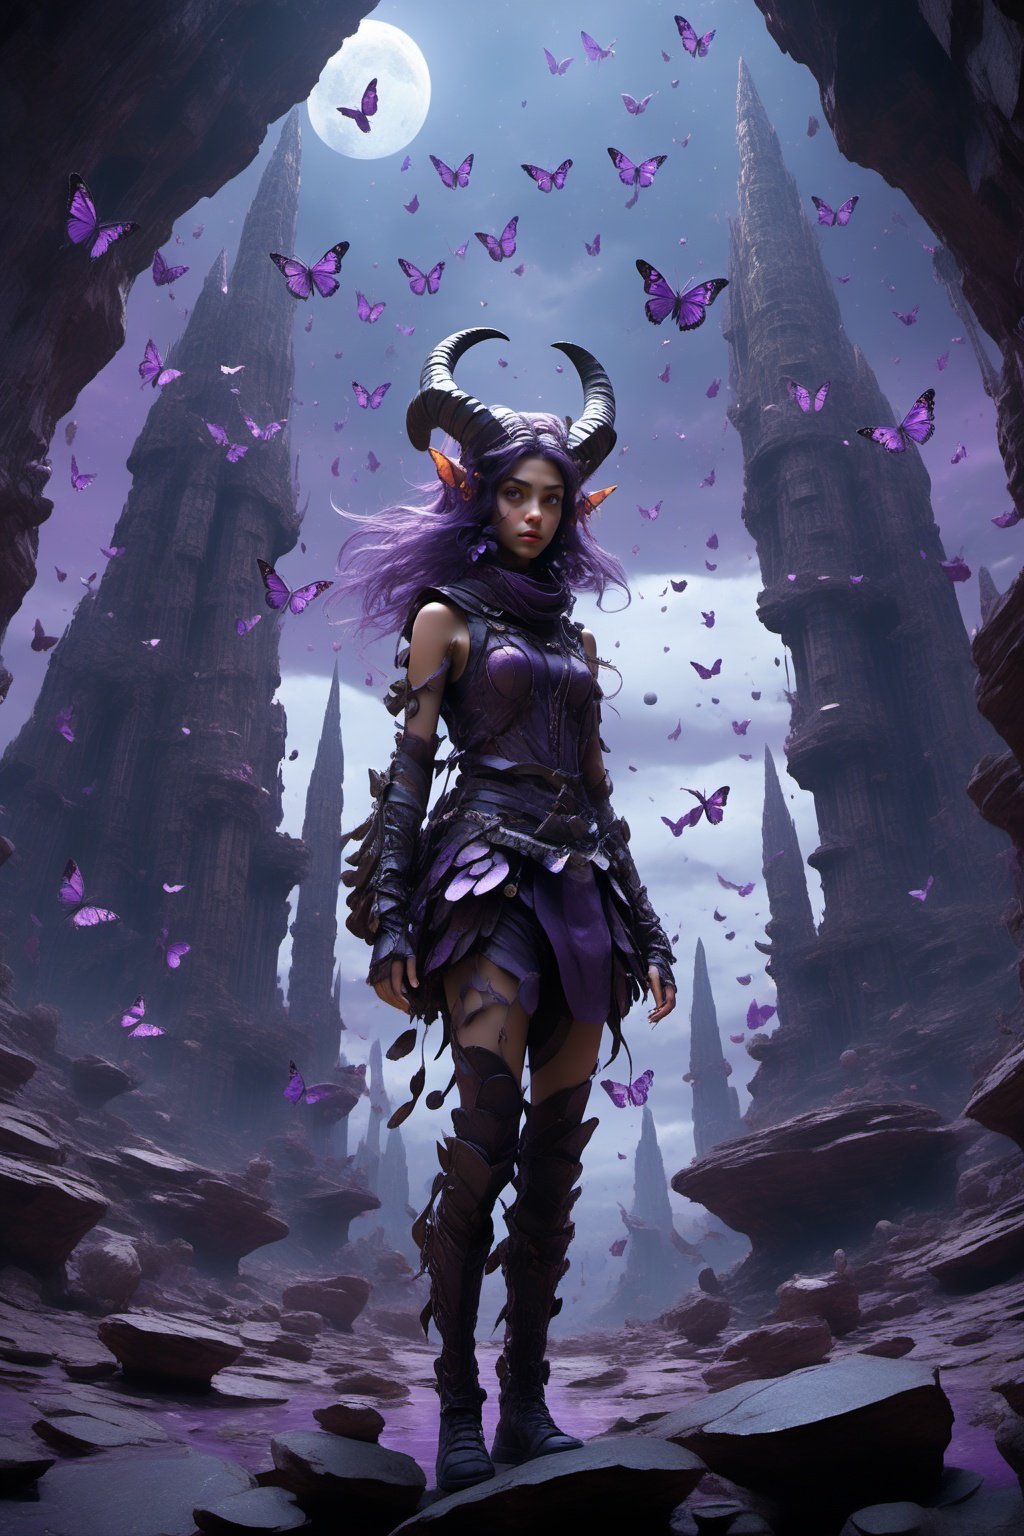 2girl,two horns on his head,looking from above,the space,afloat,moons,Running position,Wide-angle lens distortion,purple butterfly,rock,Photographic,3D Model,Cinematic,(masterpiece:1.4),Rebellious girl,NVDI,building,A high resolution,ultra - detailed,<lora:SDXL_Alien_garbage:0.7>,<lora:Blue_butterfly_SDXL1.0:0.5>,<lora:Fallen_angel_SDXL1.0:0.7>,